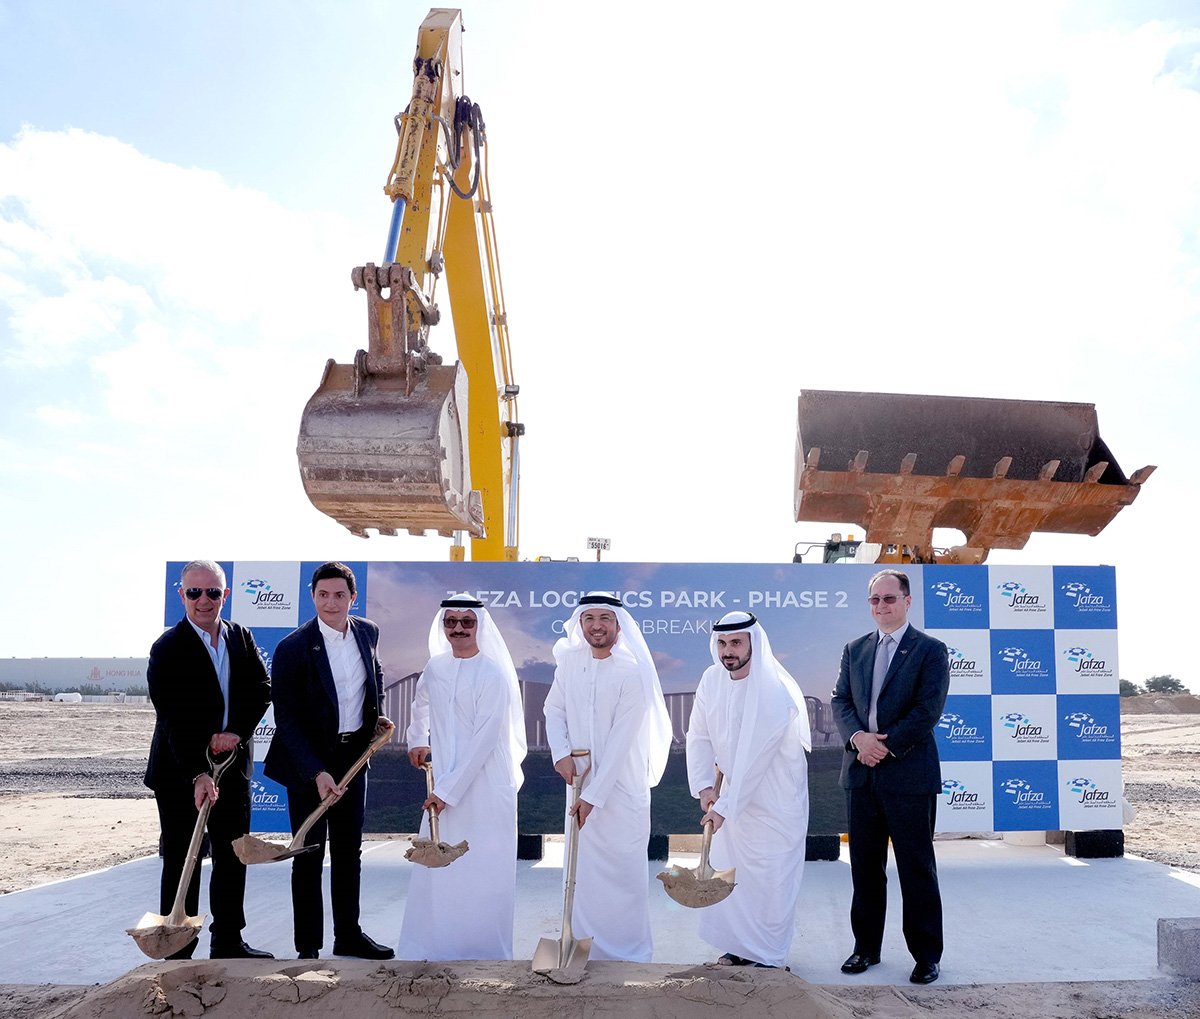 The event included a ceremonious groundbreaking for Phase 2 of Jafza Logistics Park